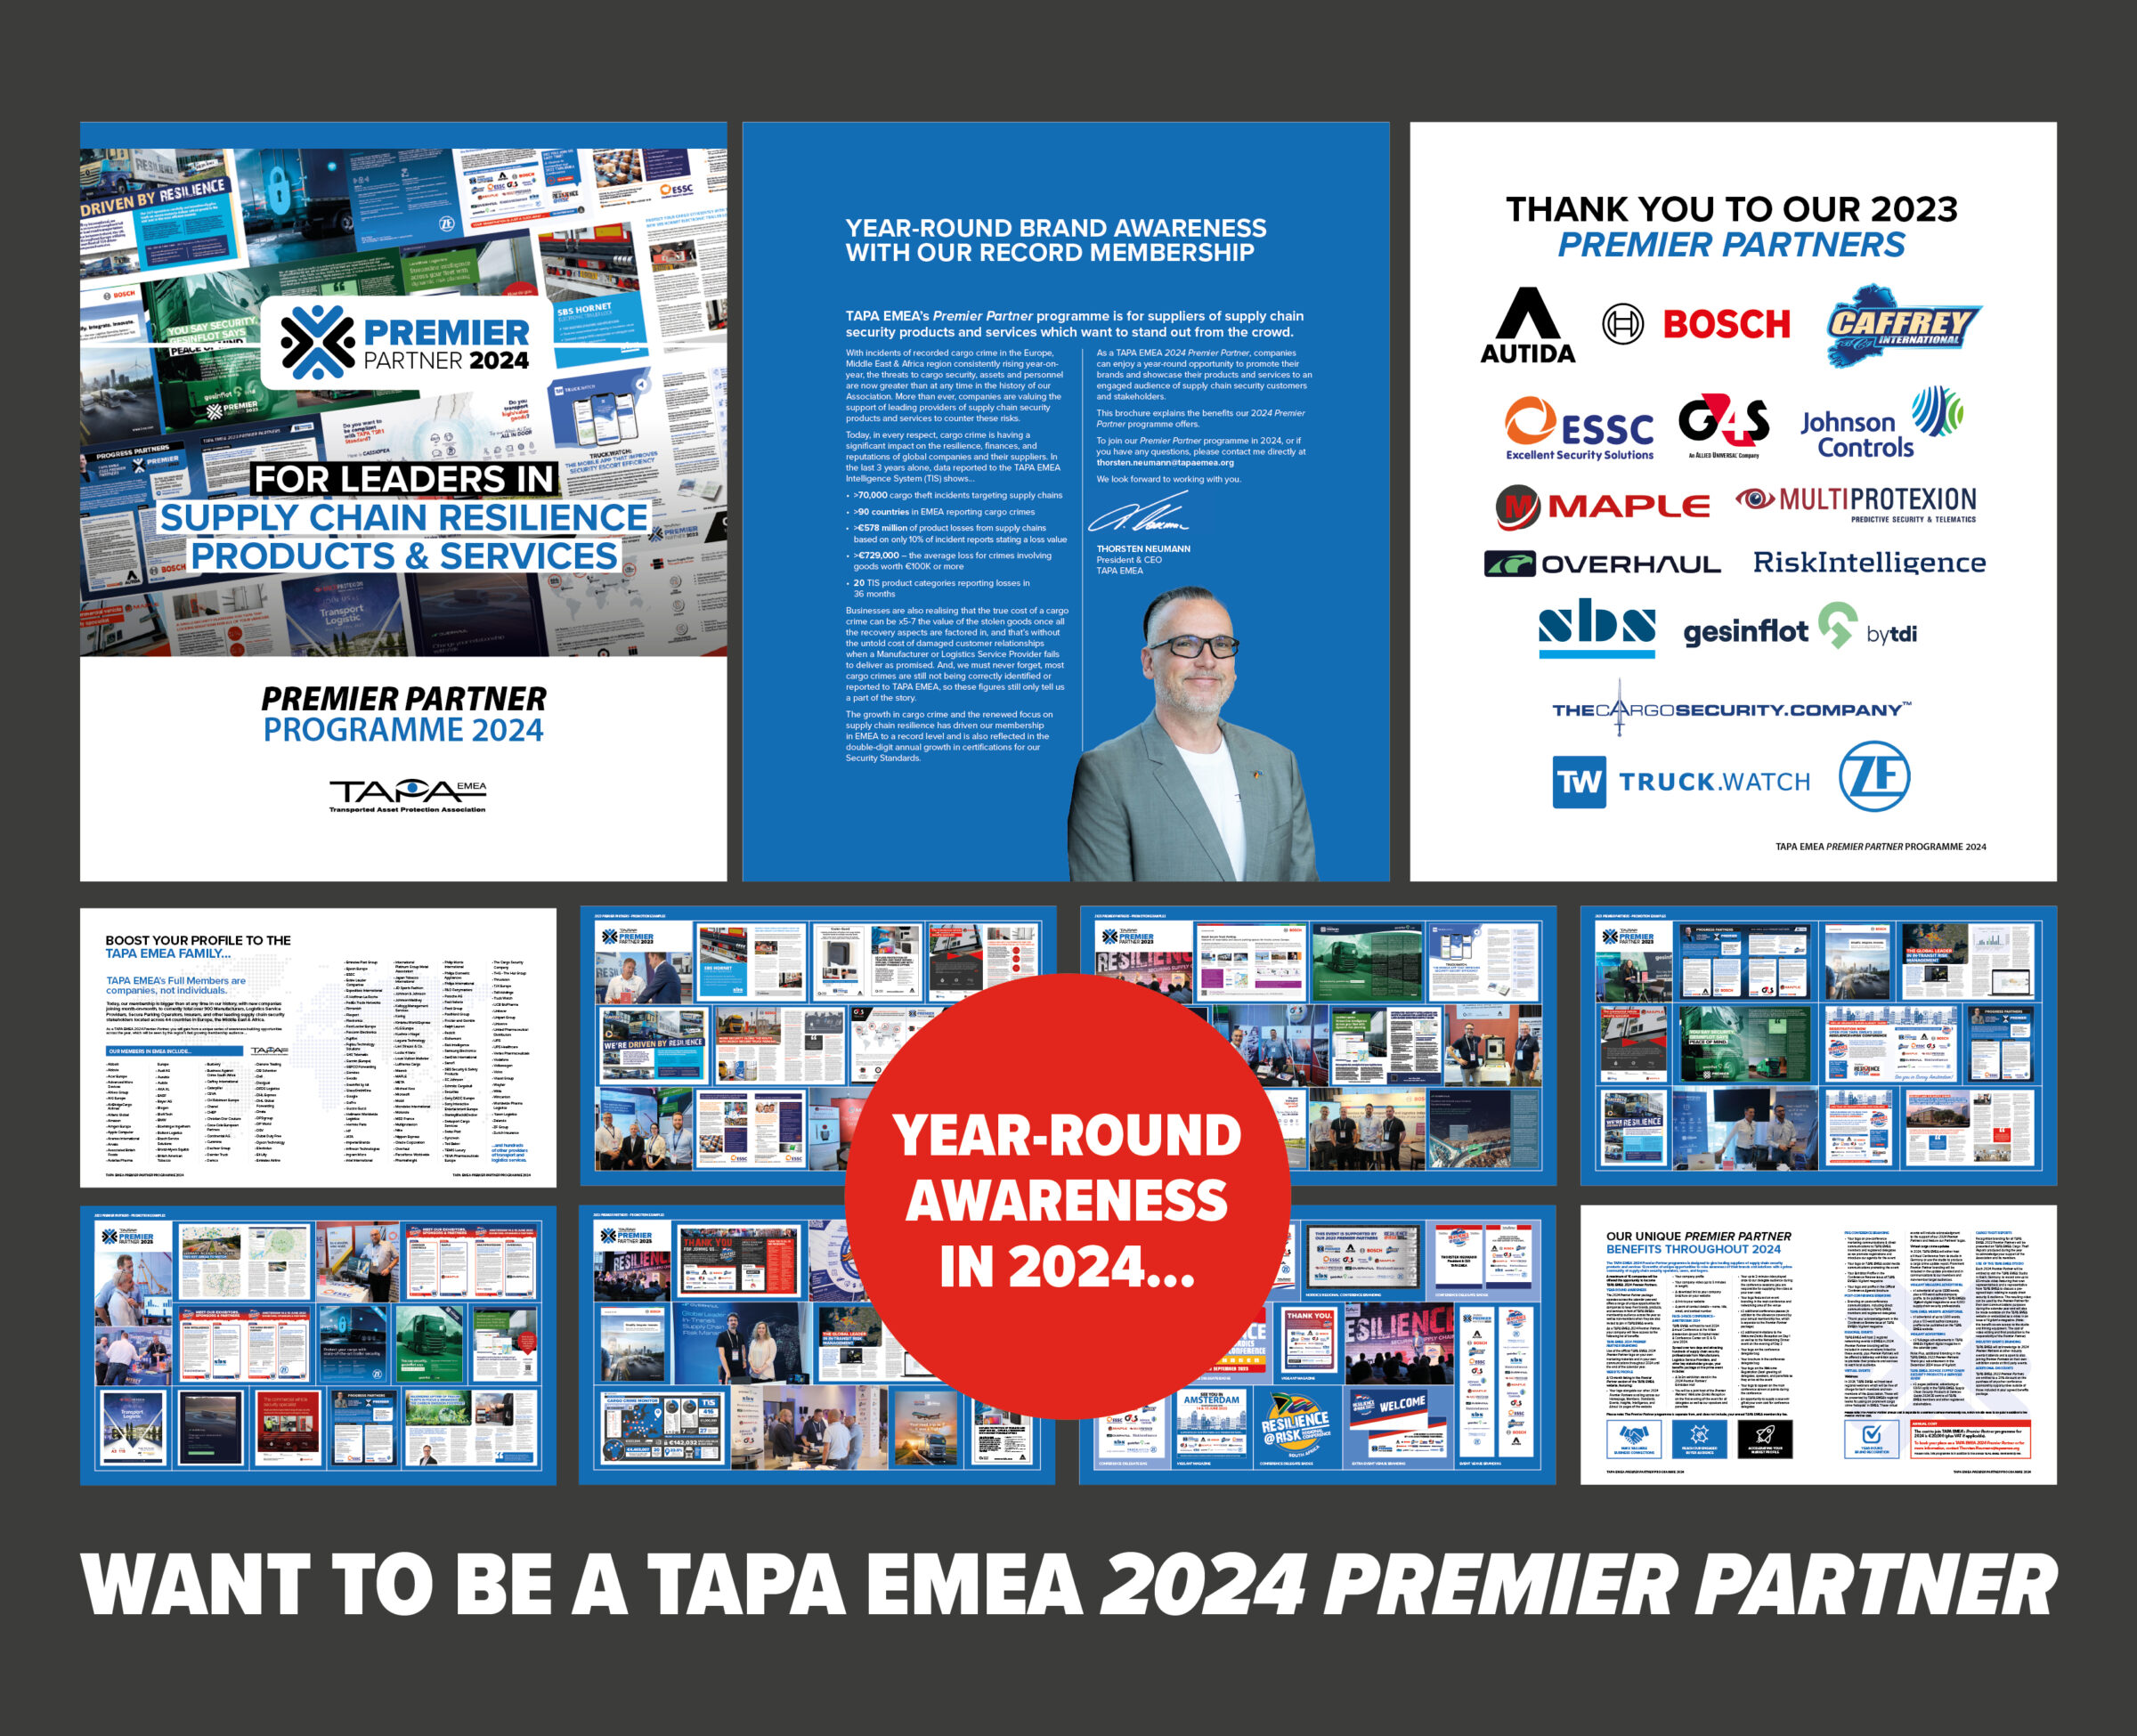 Year-Round Brand Awareness with our Record Membership Across EMEA